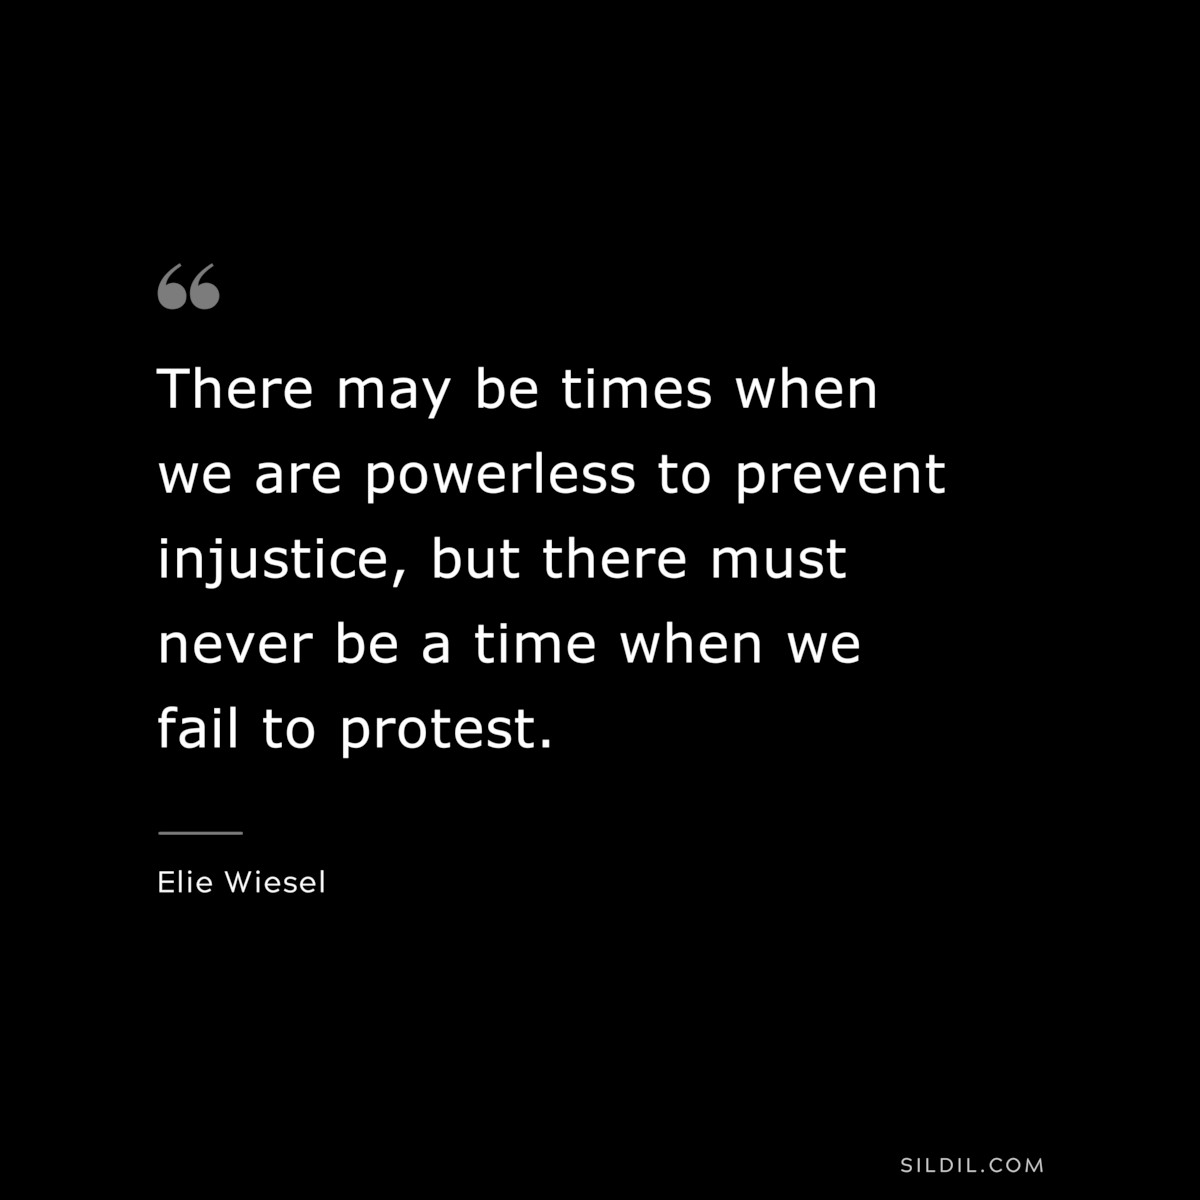 There may be times when we are powerless to prevent injustice, but there must never be a time when we fail to protest. ― Elie Wiesel